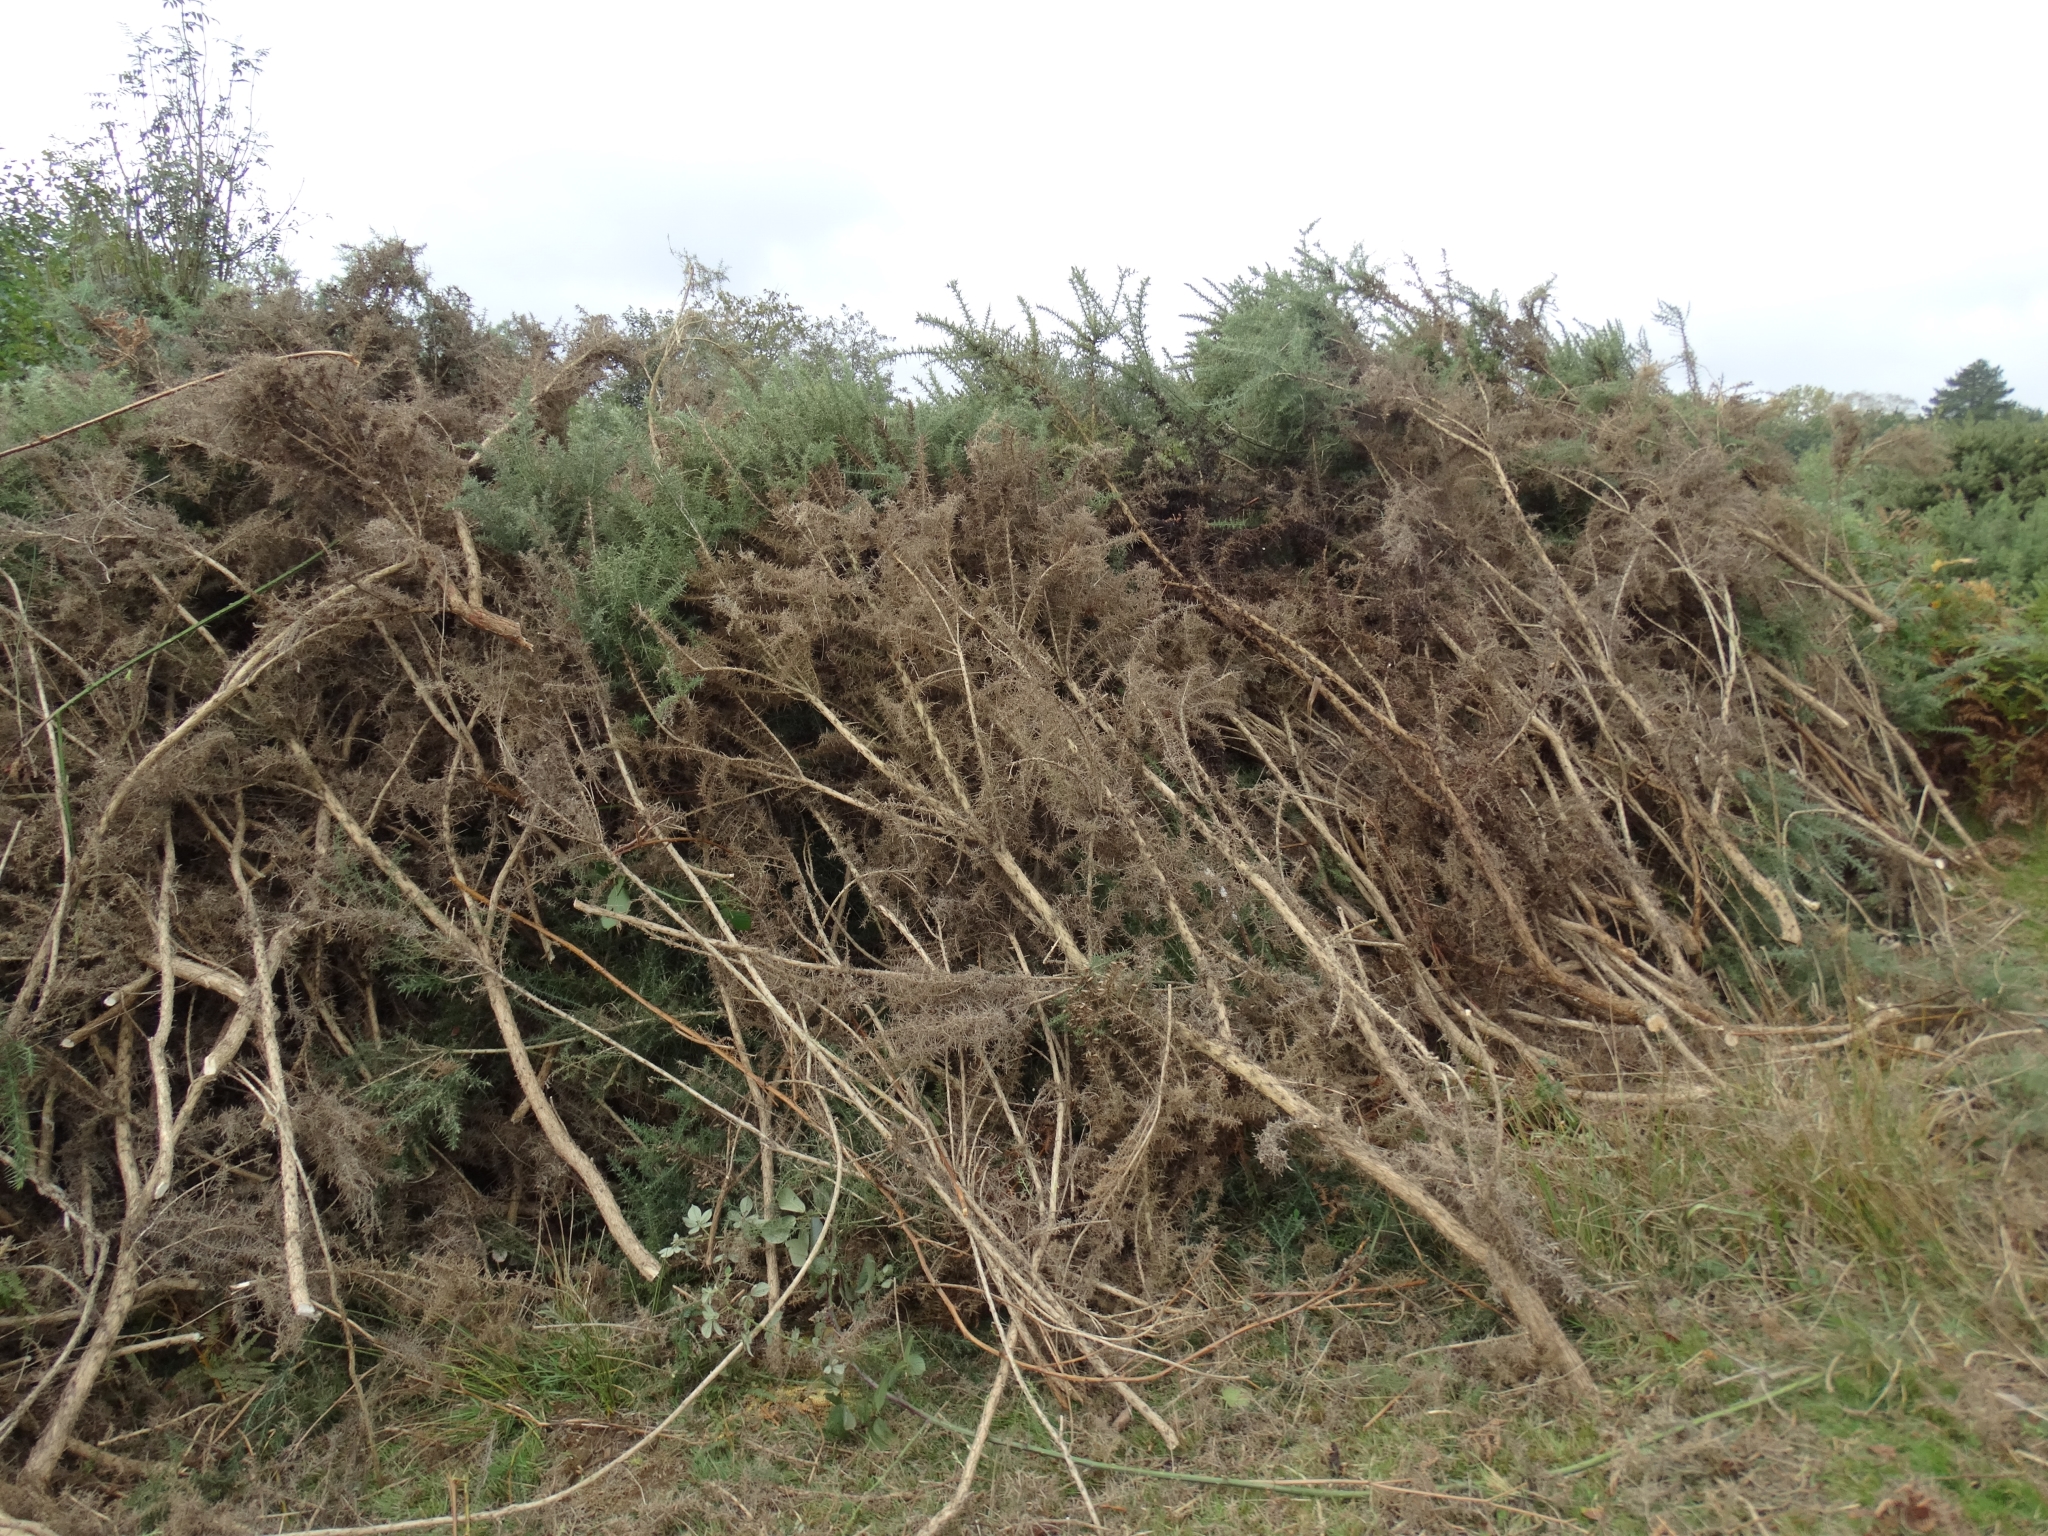 A photo from the FoTF Conservation Event - October 2019 - Gorse Clearance at Hockham Hills & Holes : An area cleared by the volunteers